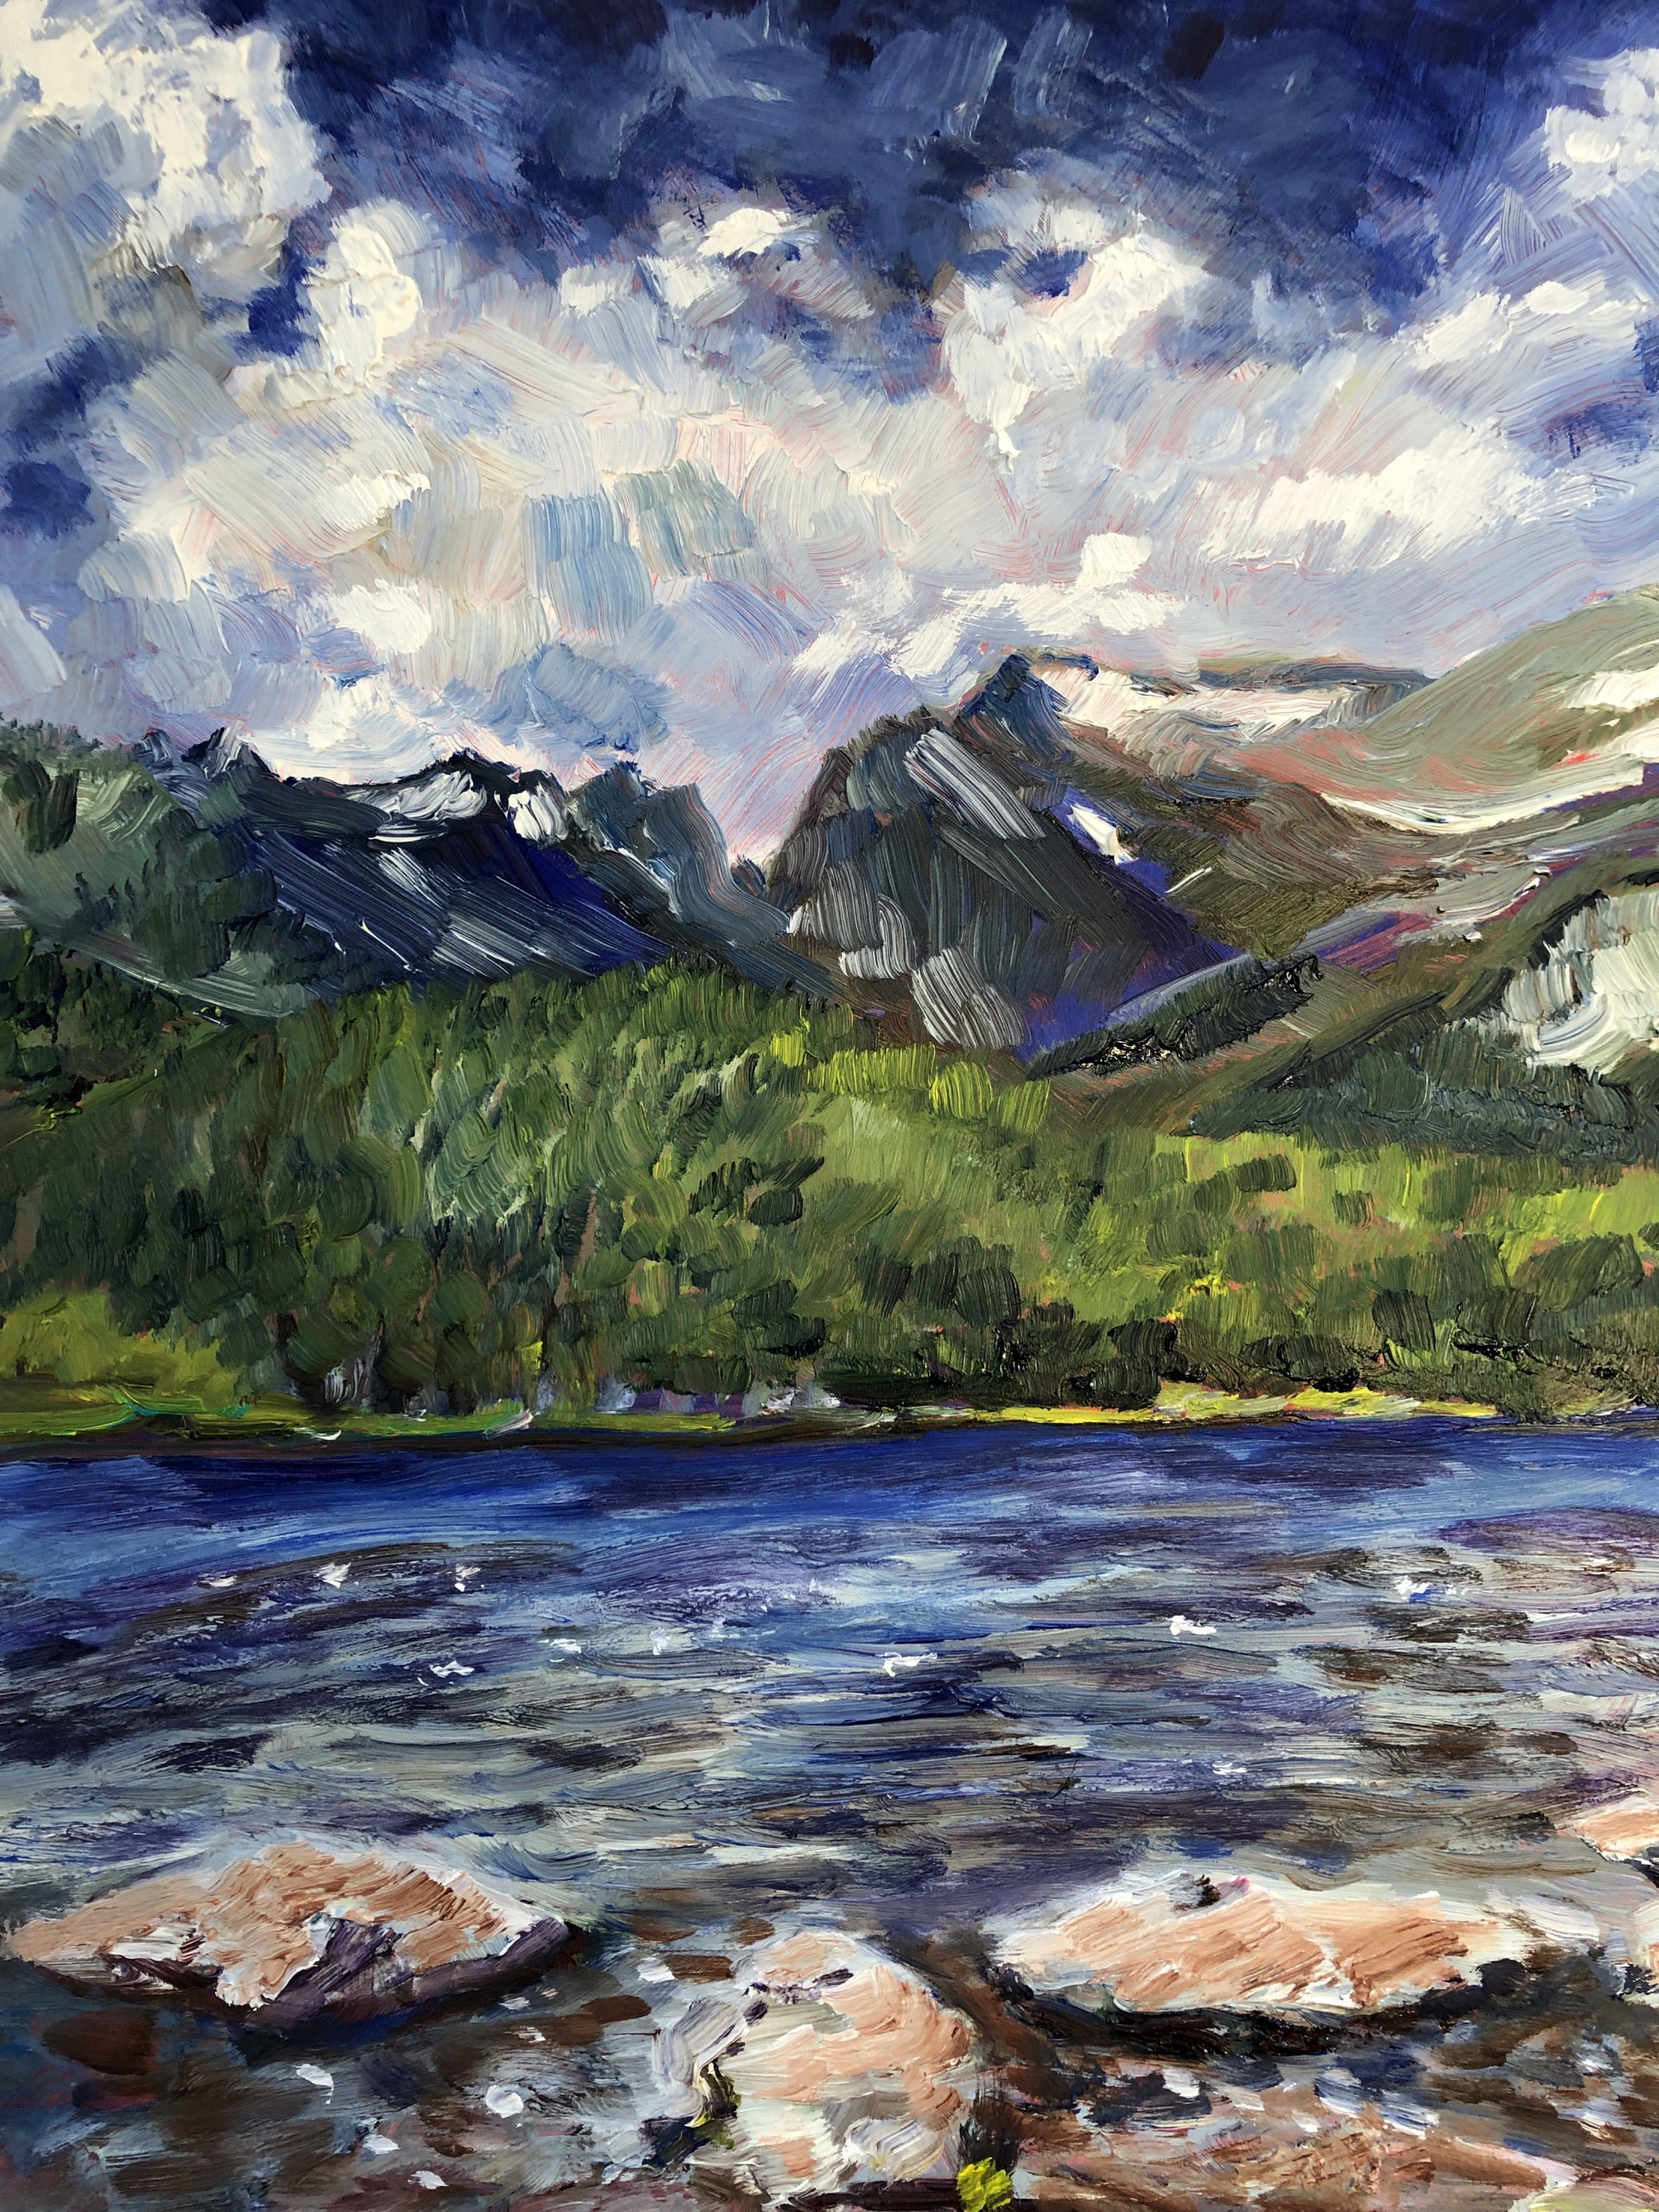 Painting of a lake with mountains in the background